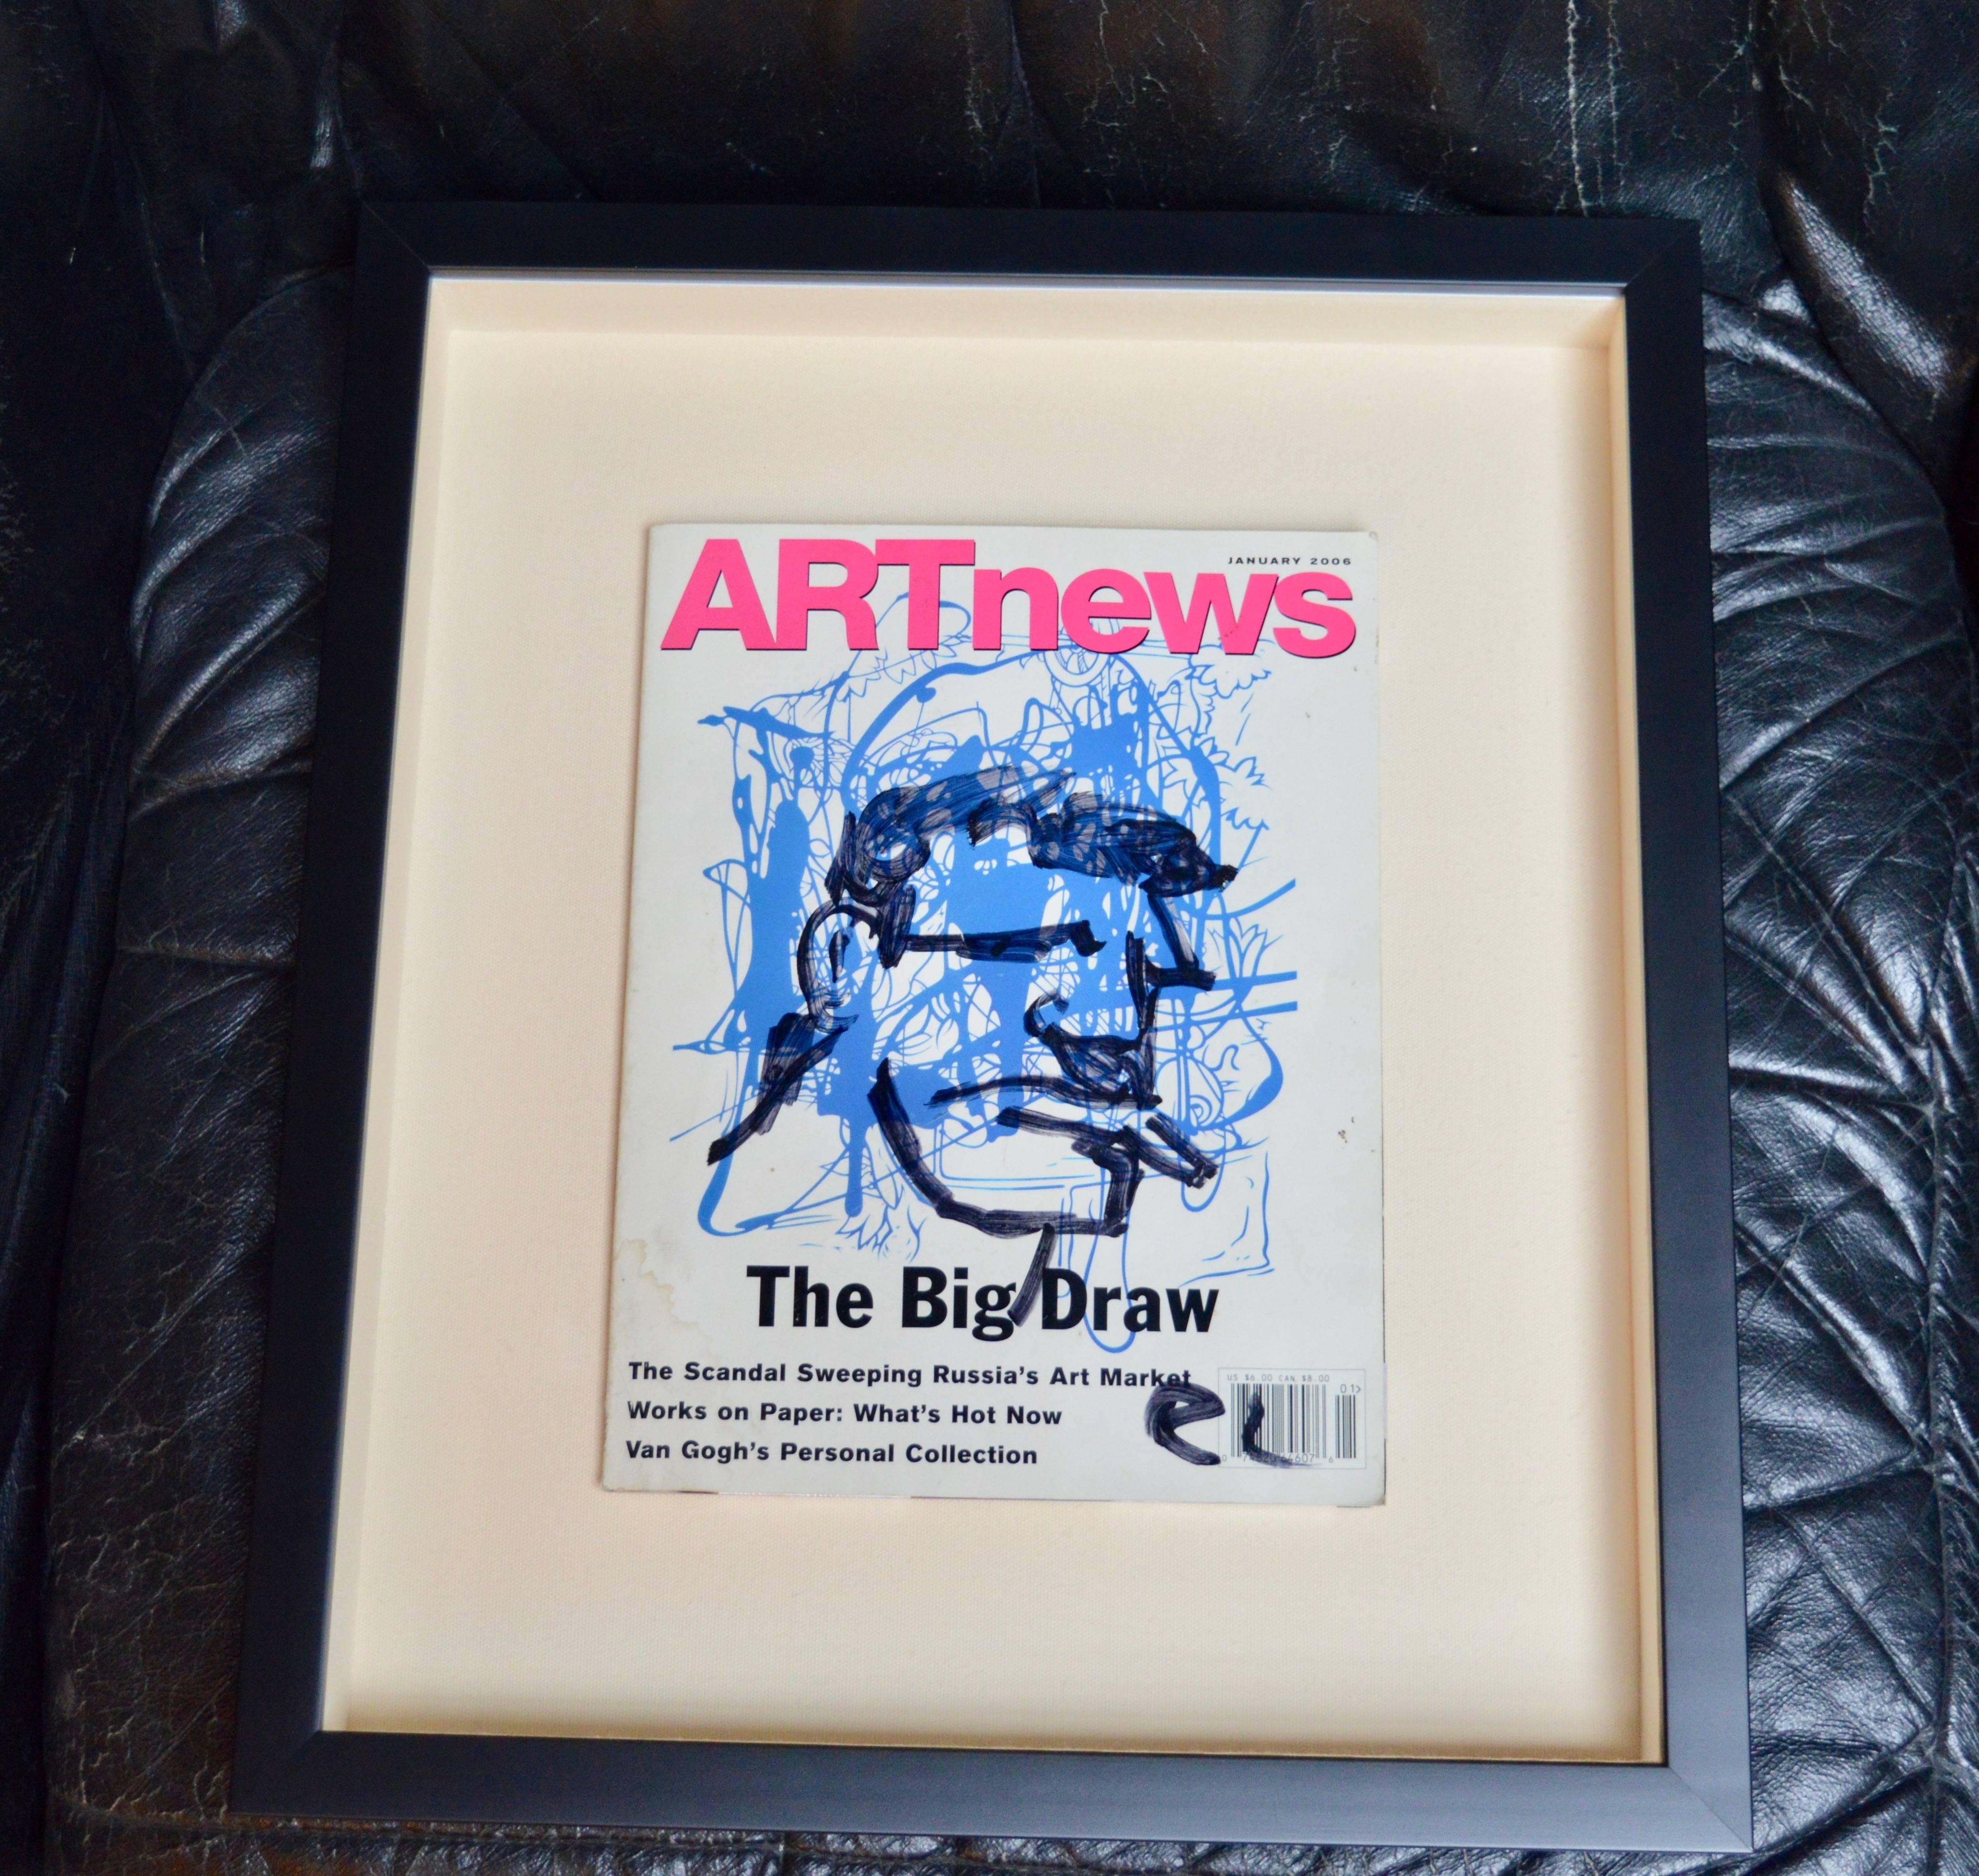 Fantastic original painting/drawing by Robert Loughlin on ARTnews magazine. Signed RL. Newly framed with UV protective plexiglass. Excellent condition. Comes with certificate of authenticity. 

Multiple Robert Loughlin originals available in